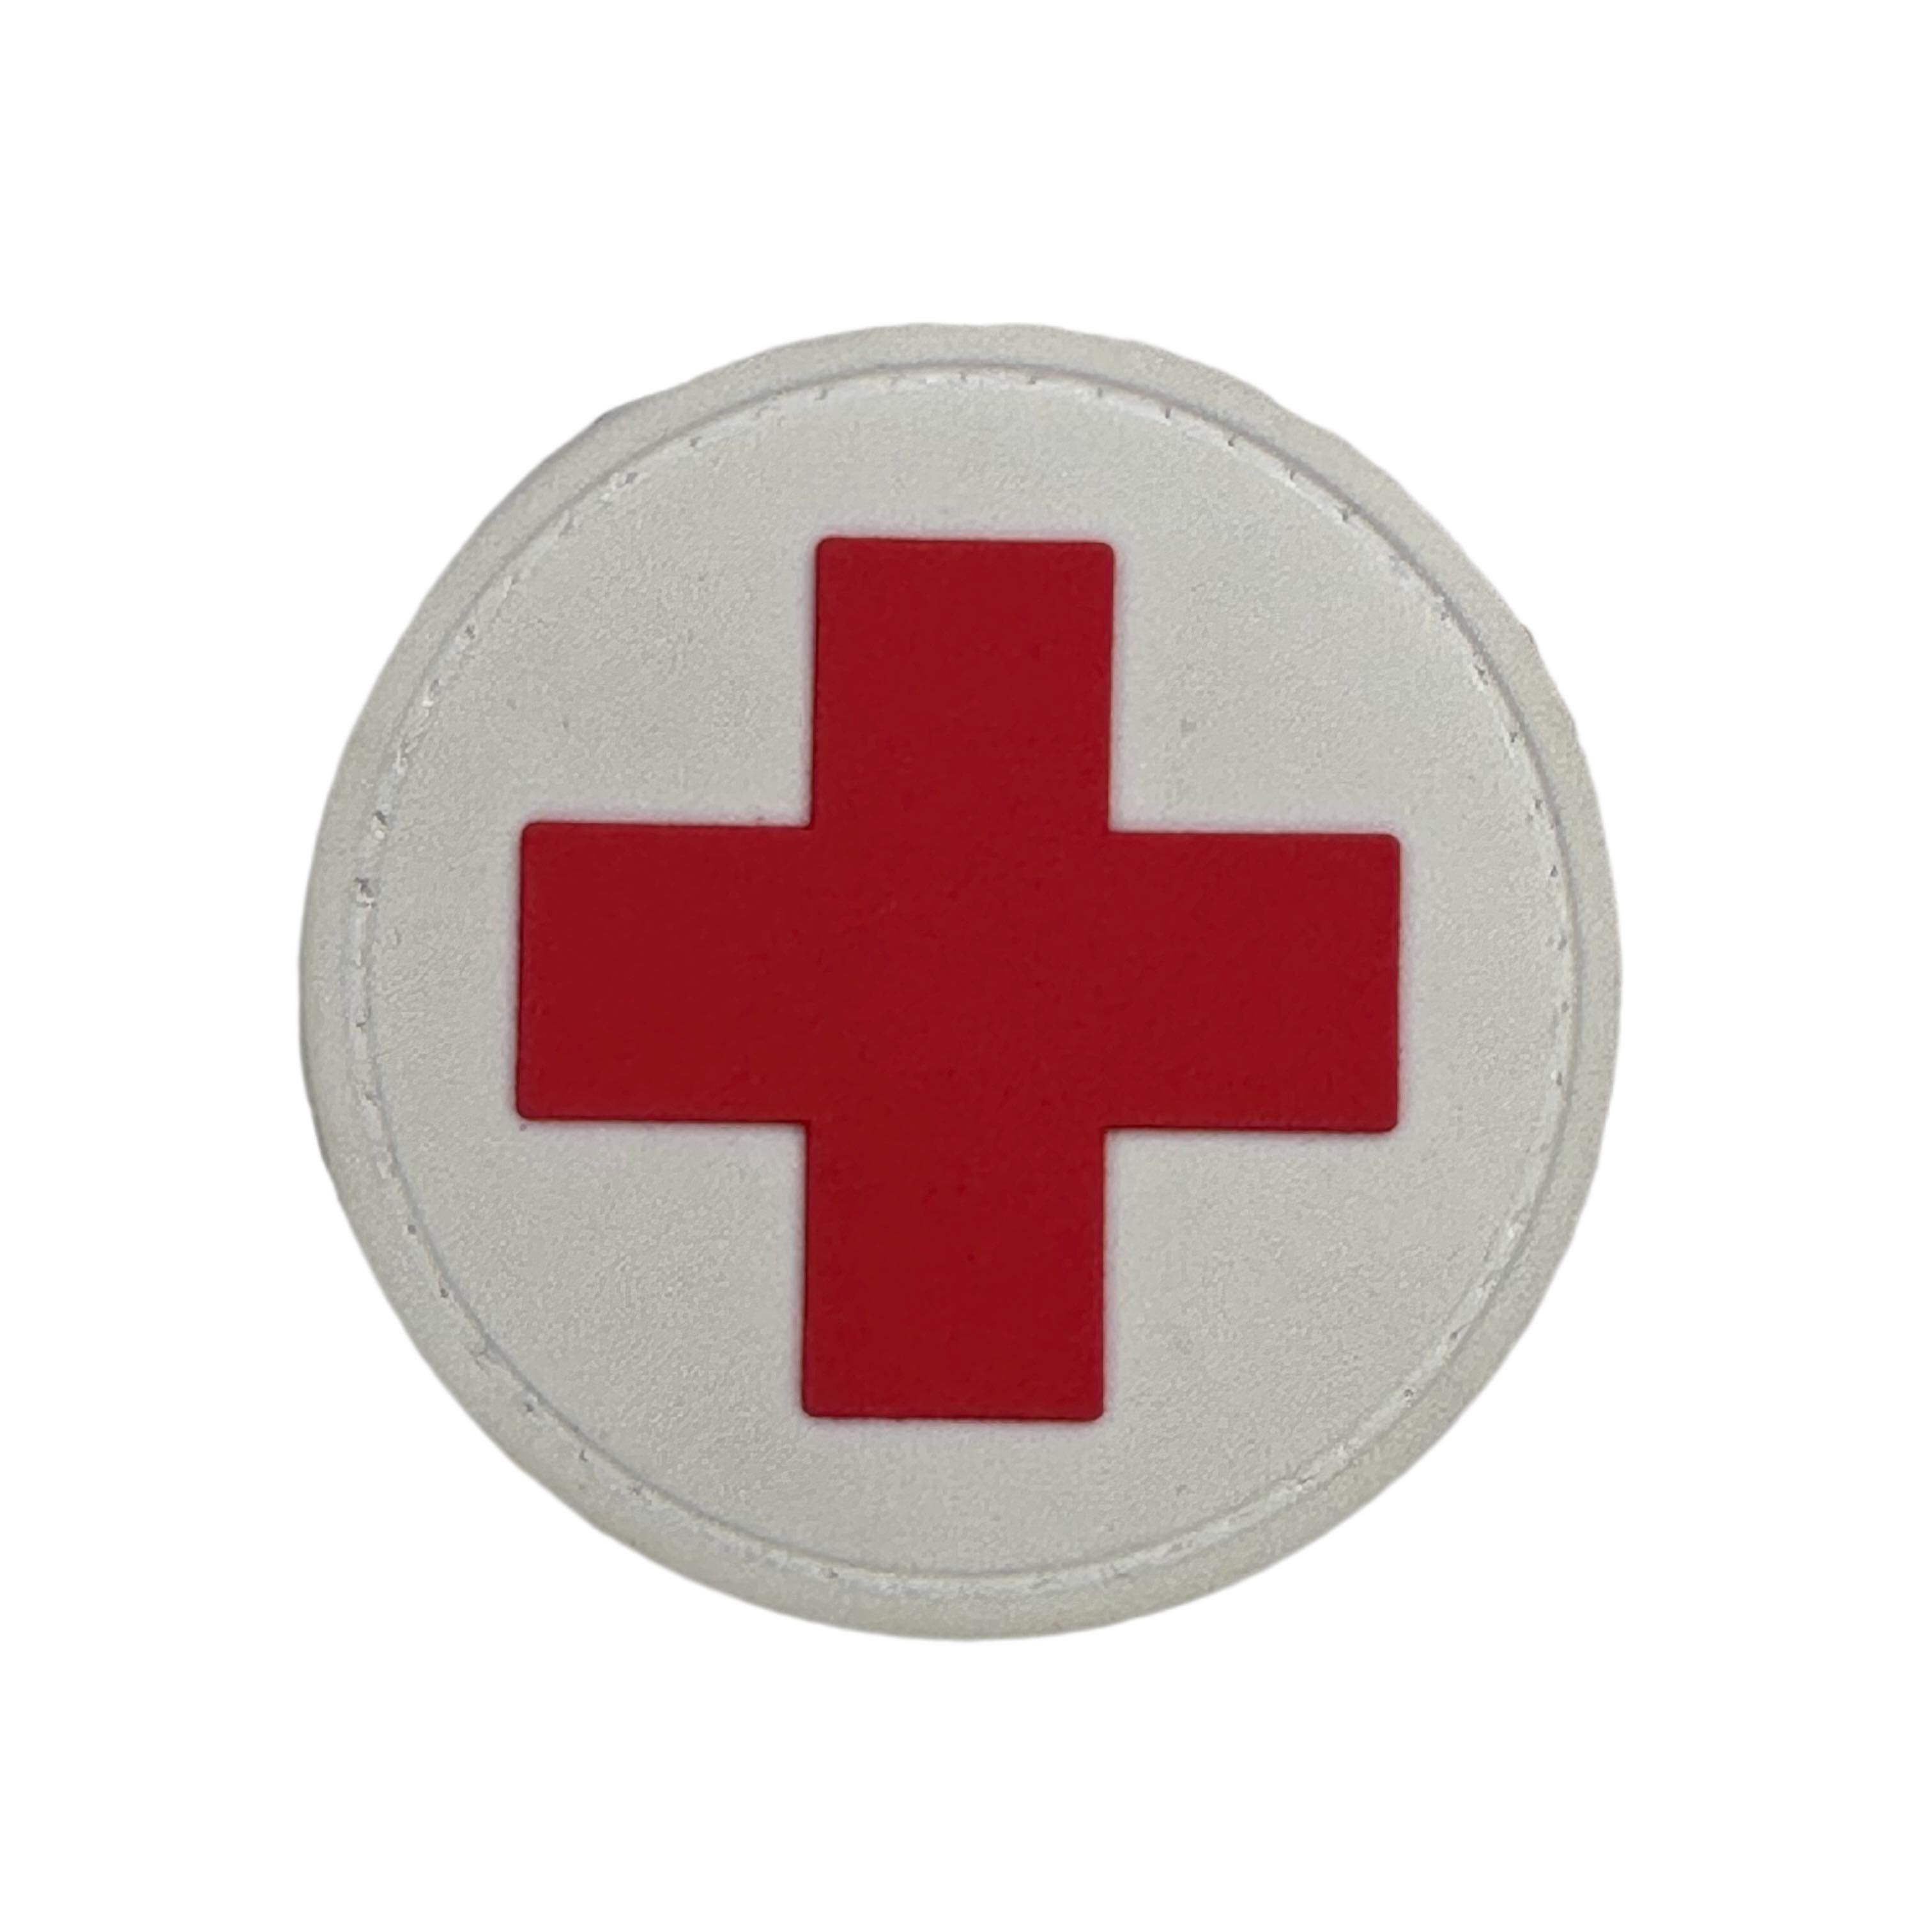 Rubber Patch - Medic Red Cross